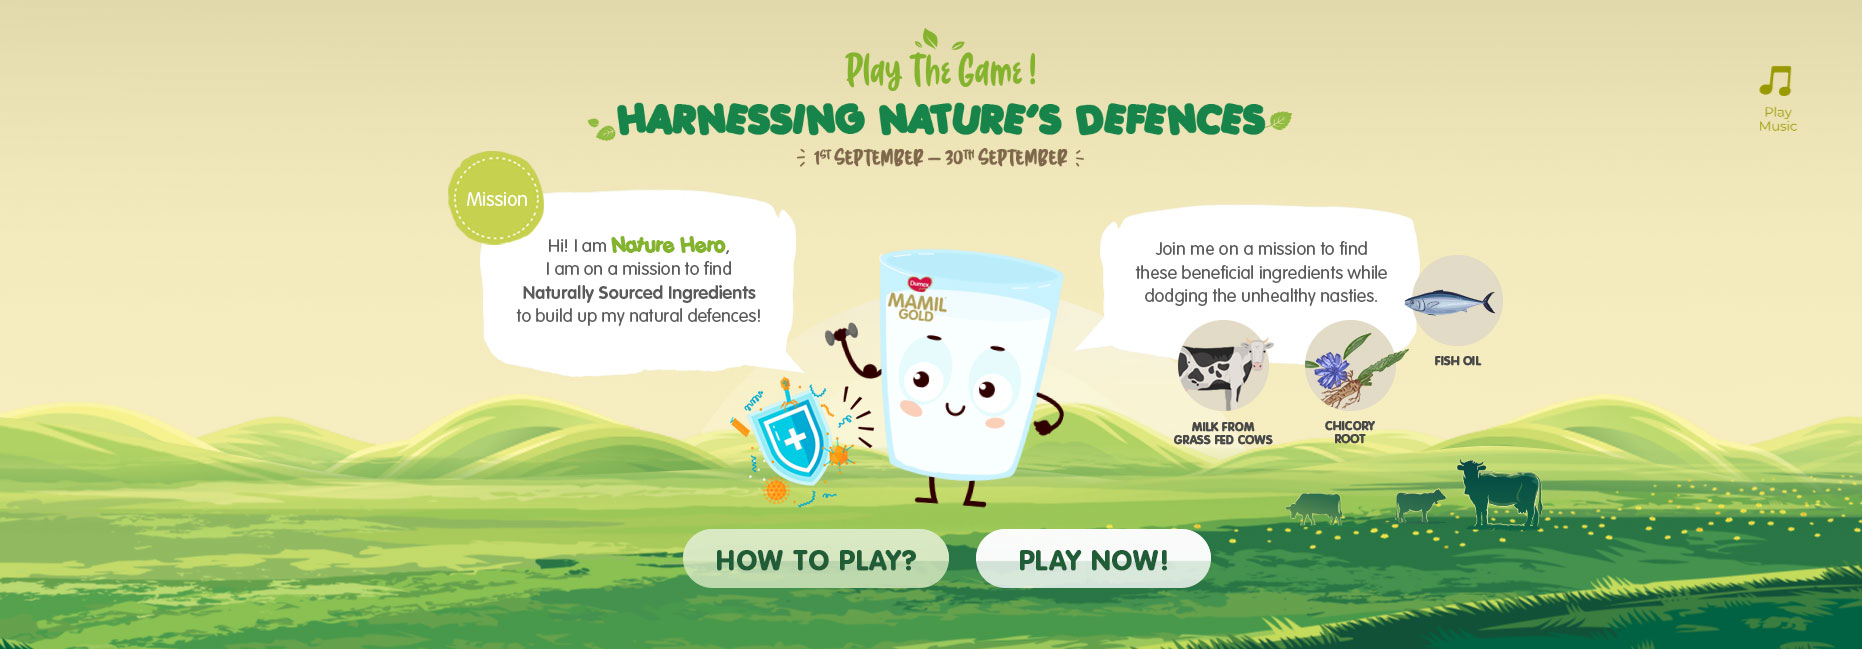 Harnessing Nature's Defences